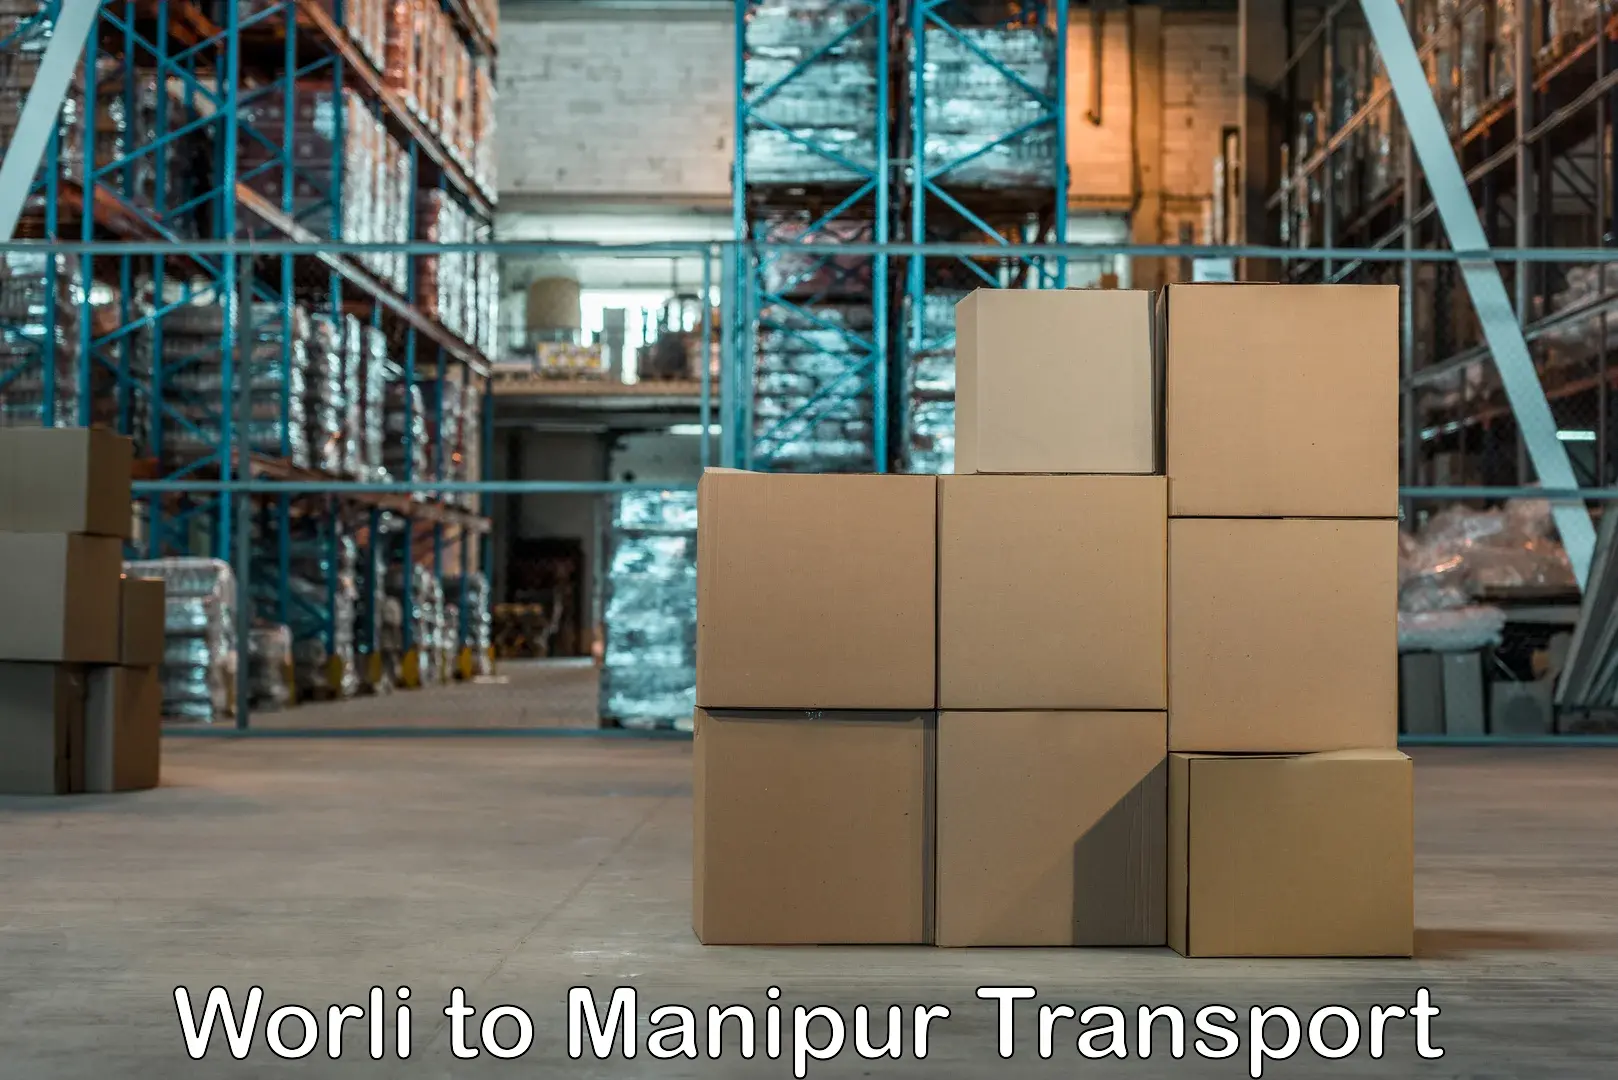 Goods delivery service Worli to Manipur